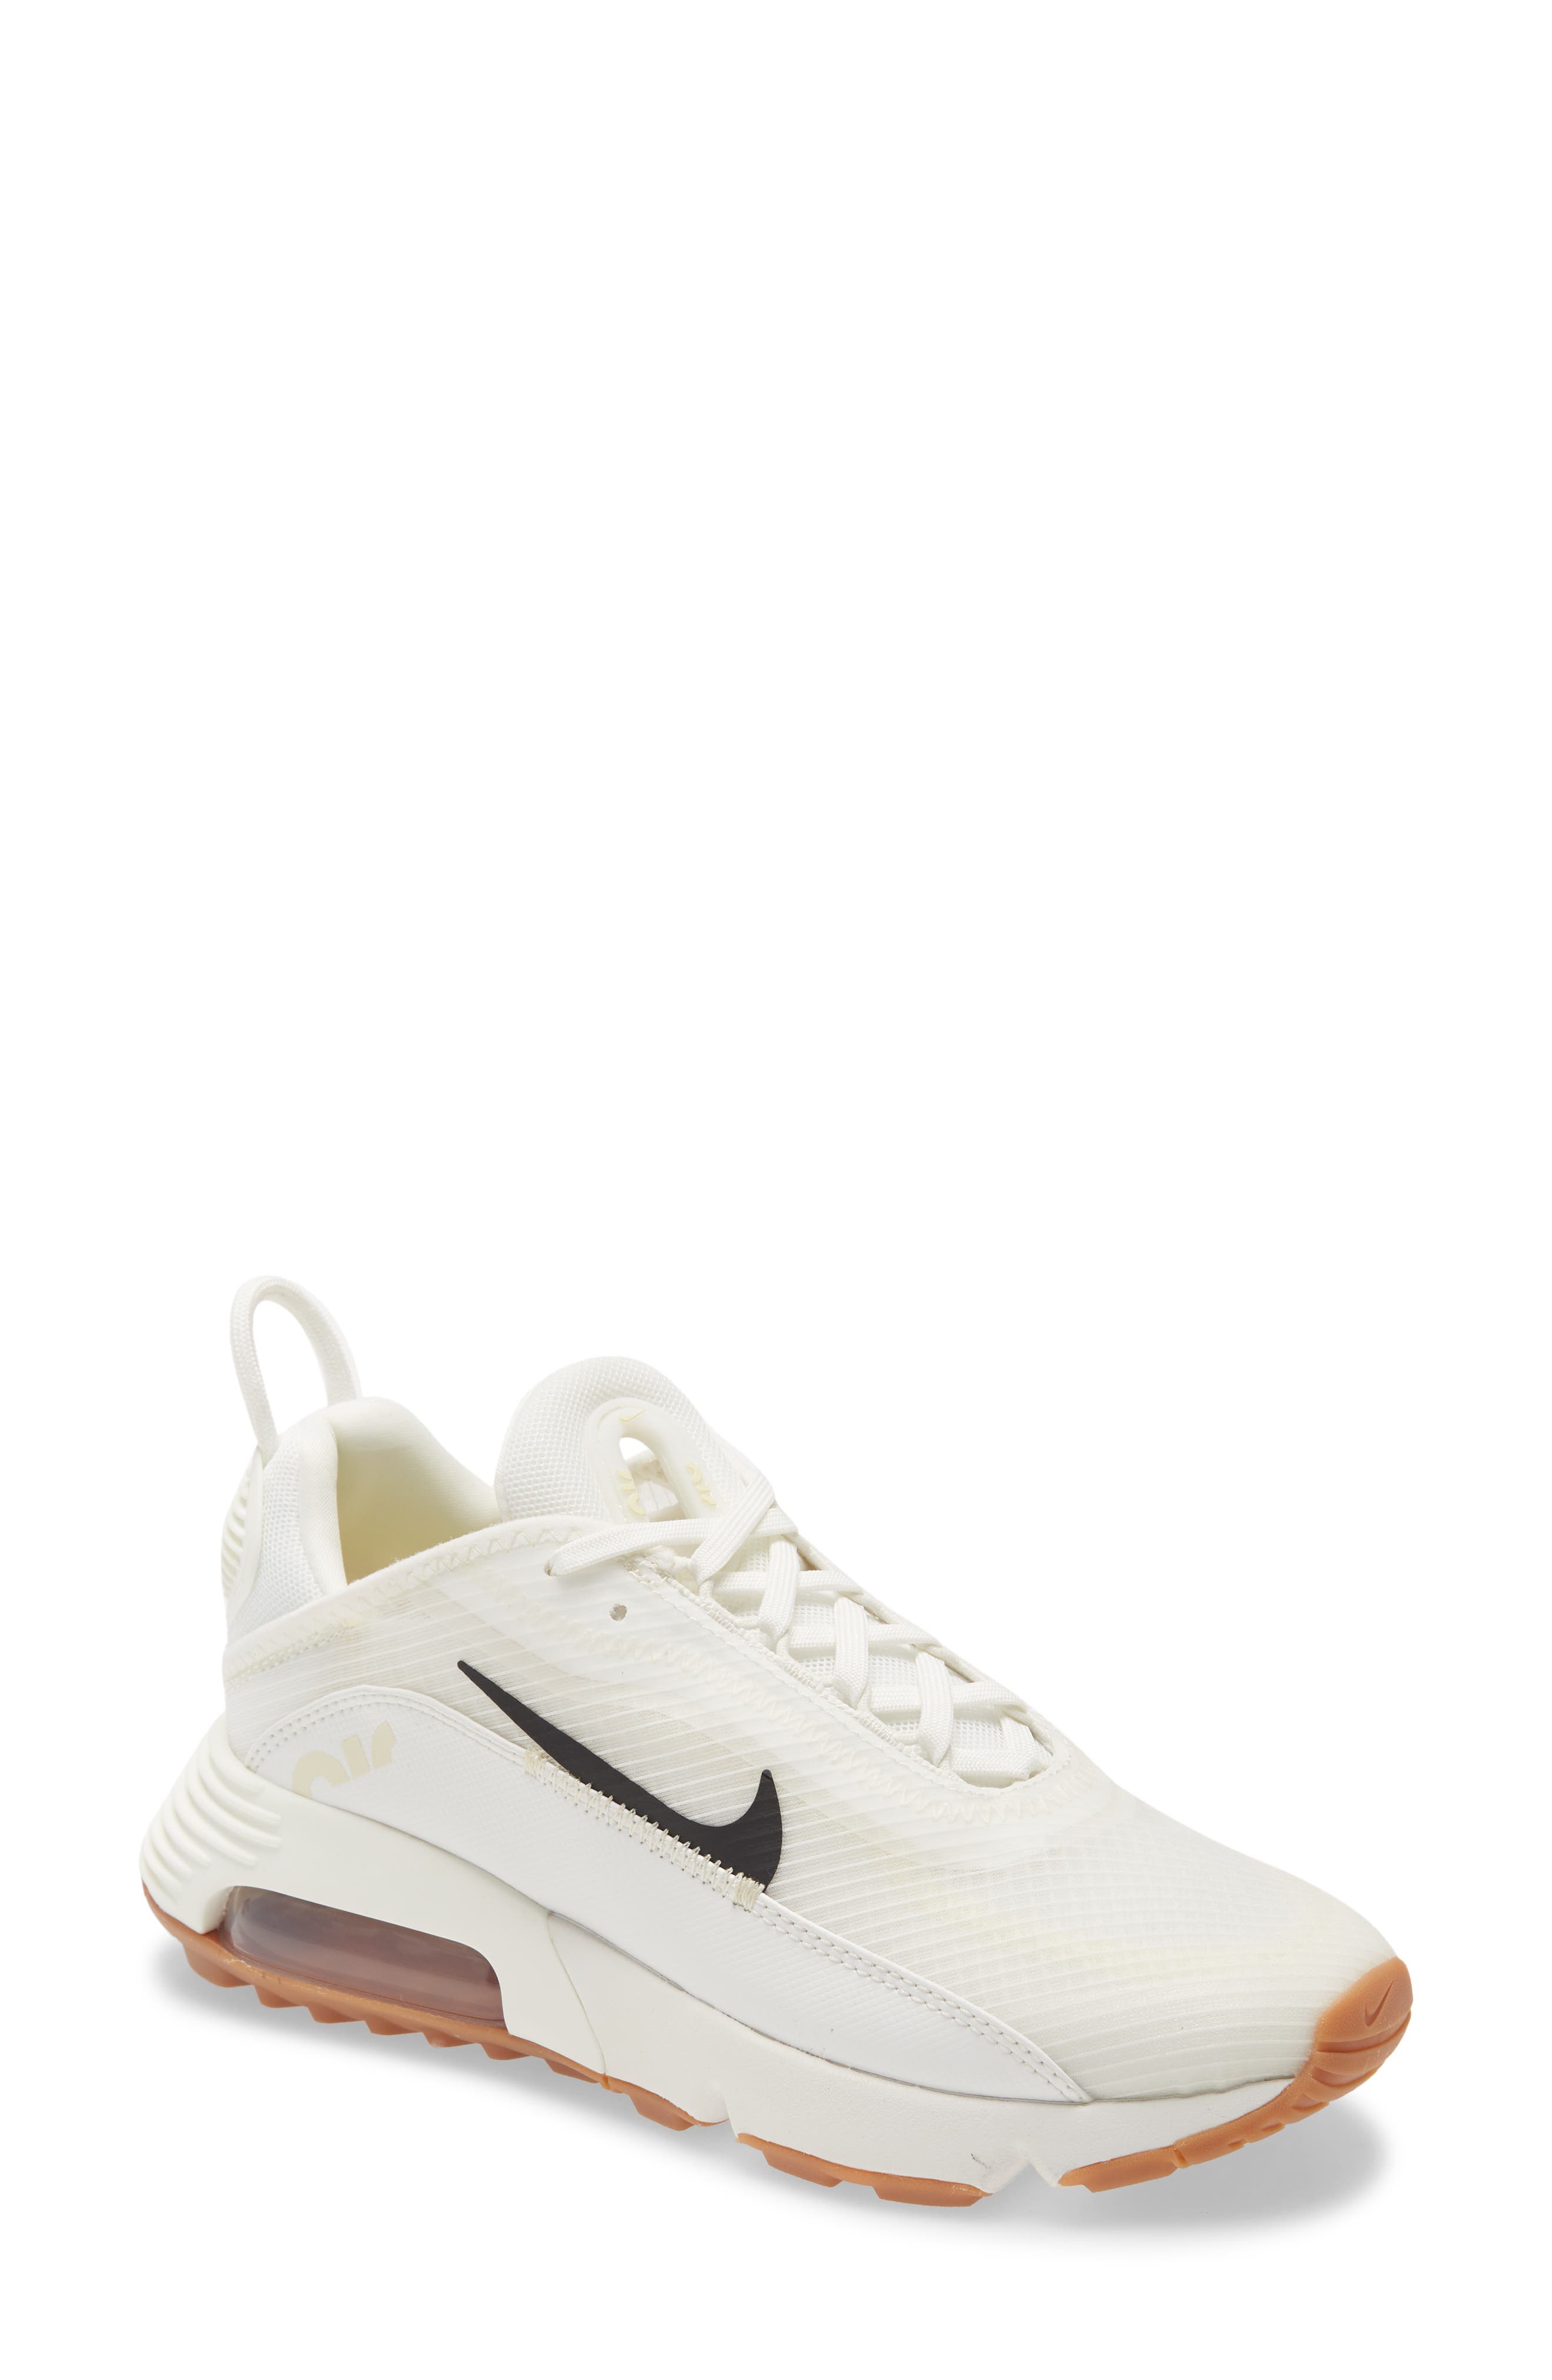 nordstrom nike womens shoes